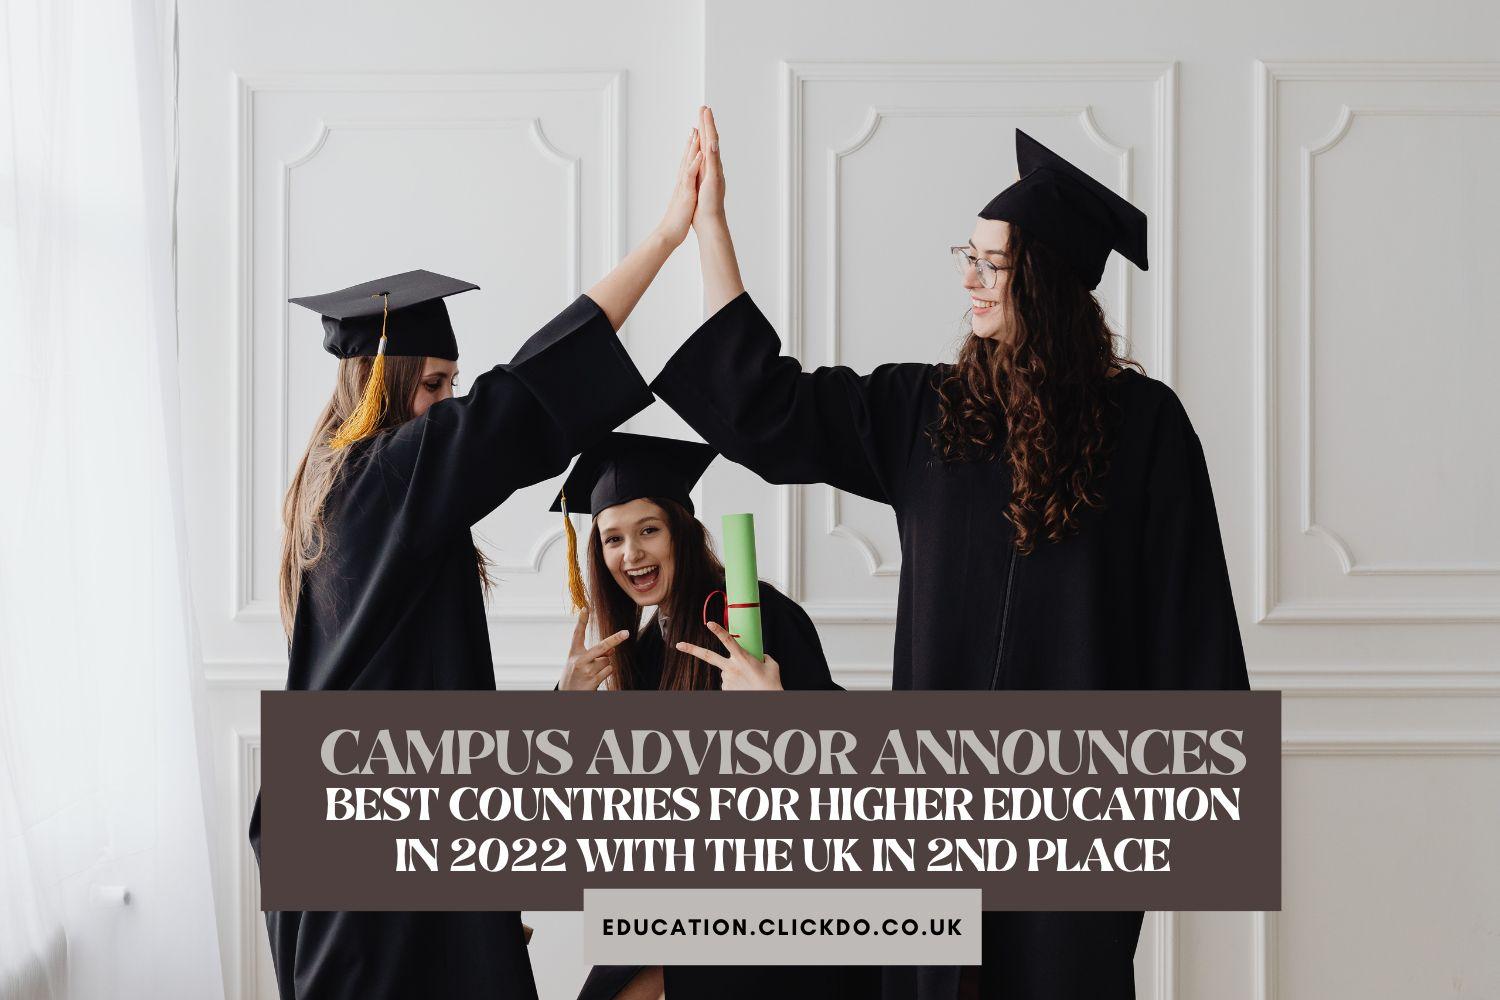 Campus Advisor announces 20 countries for higher education in 2022 with the UK in 2nd place – Education.clickdo.co.uk